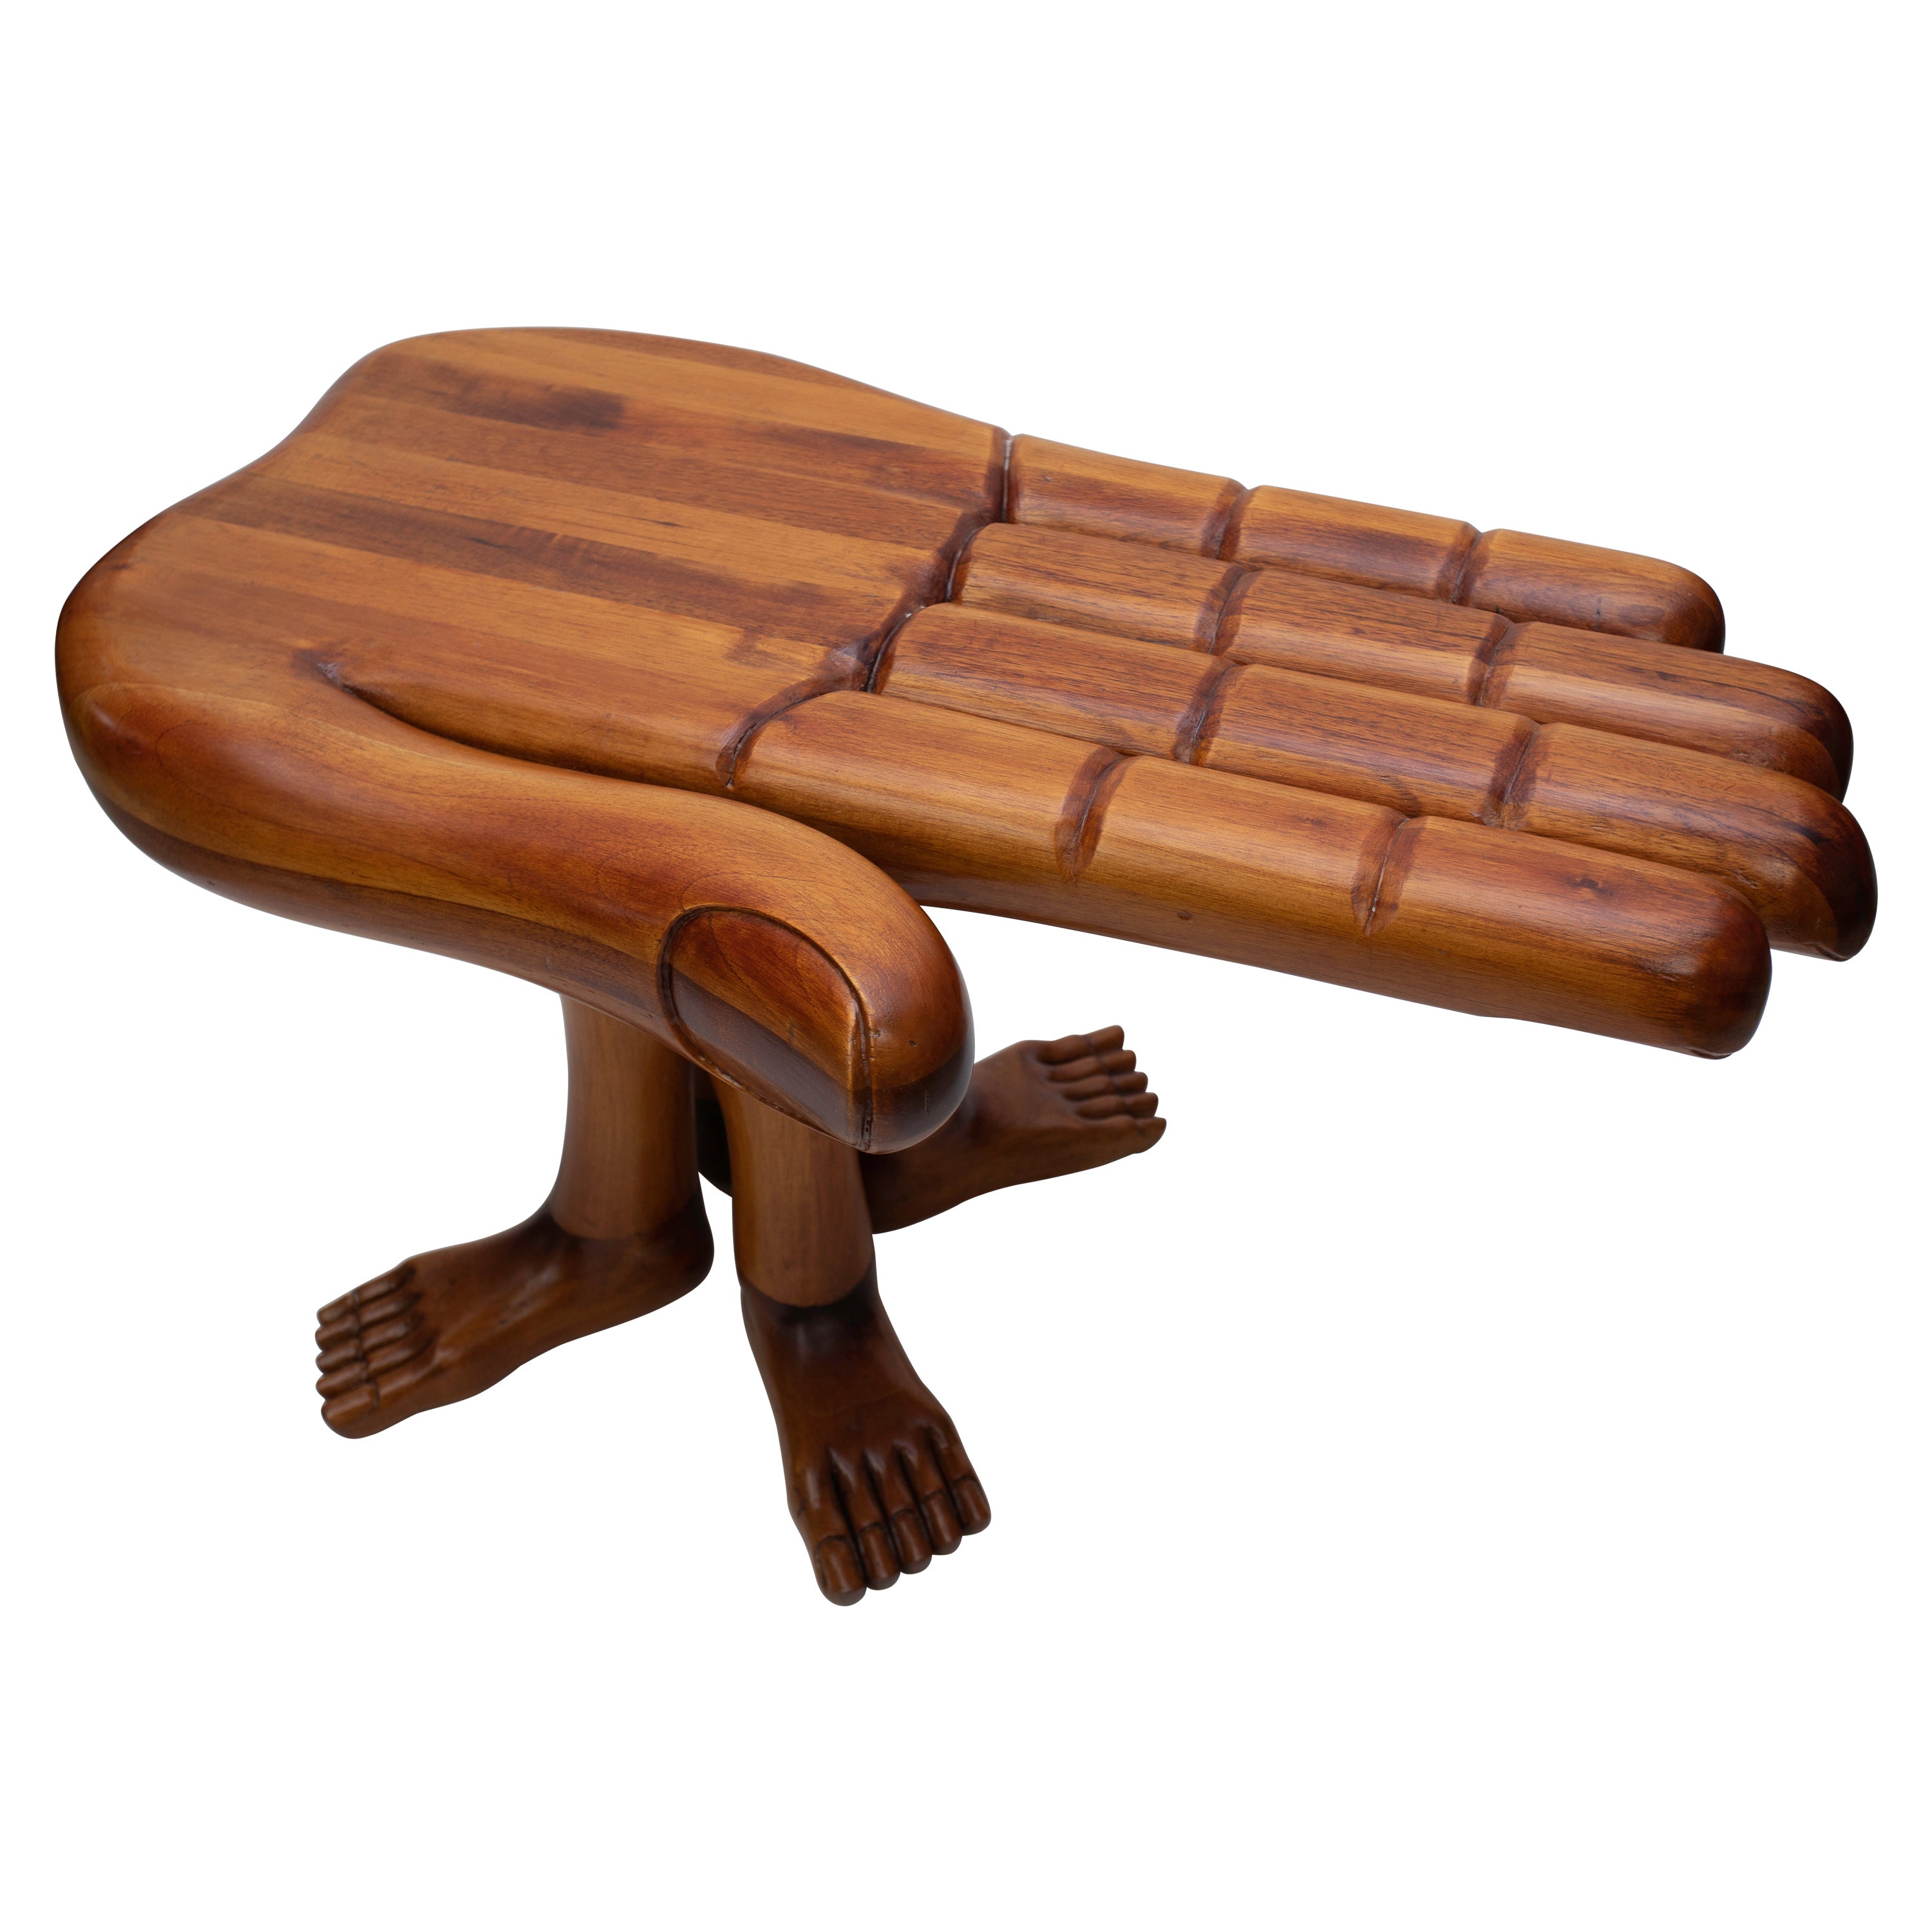 Pedro Friedeberg Hand-Foot Table For Sale